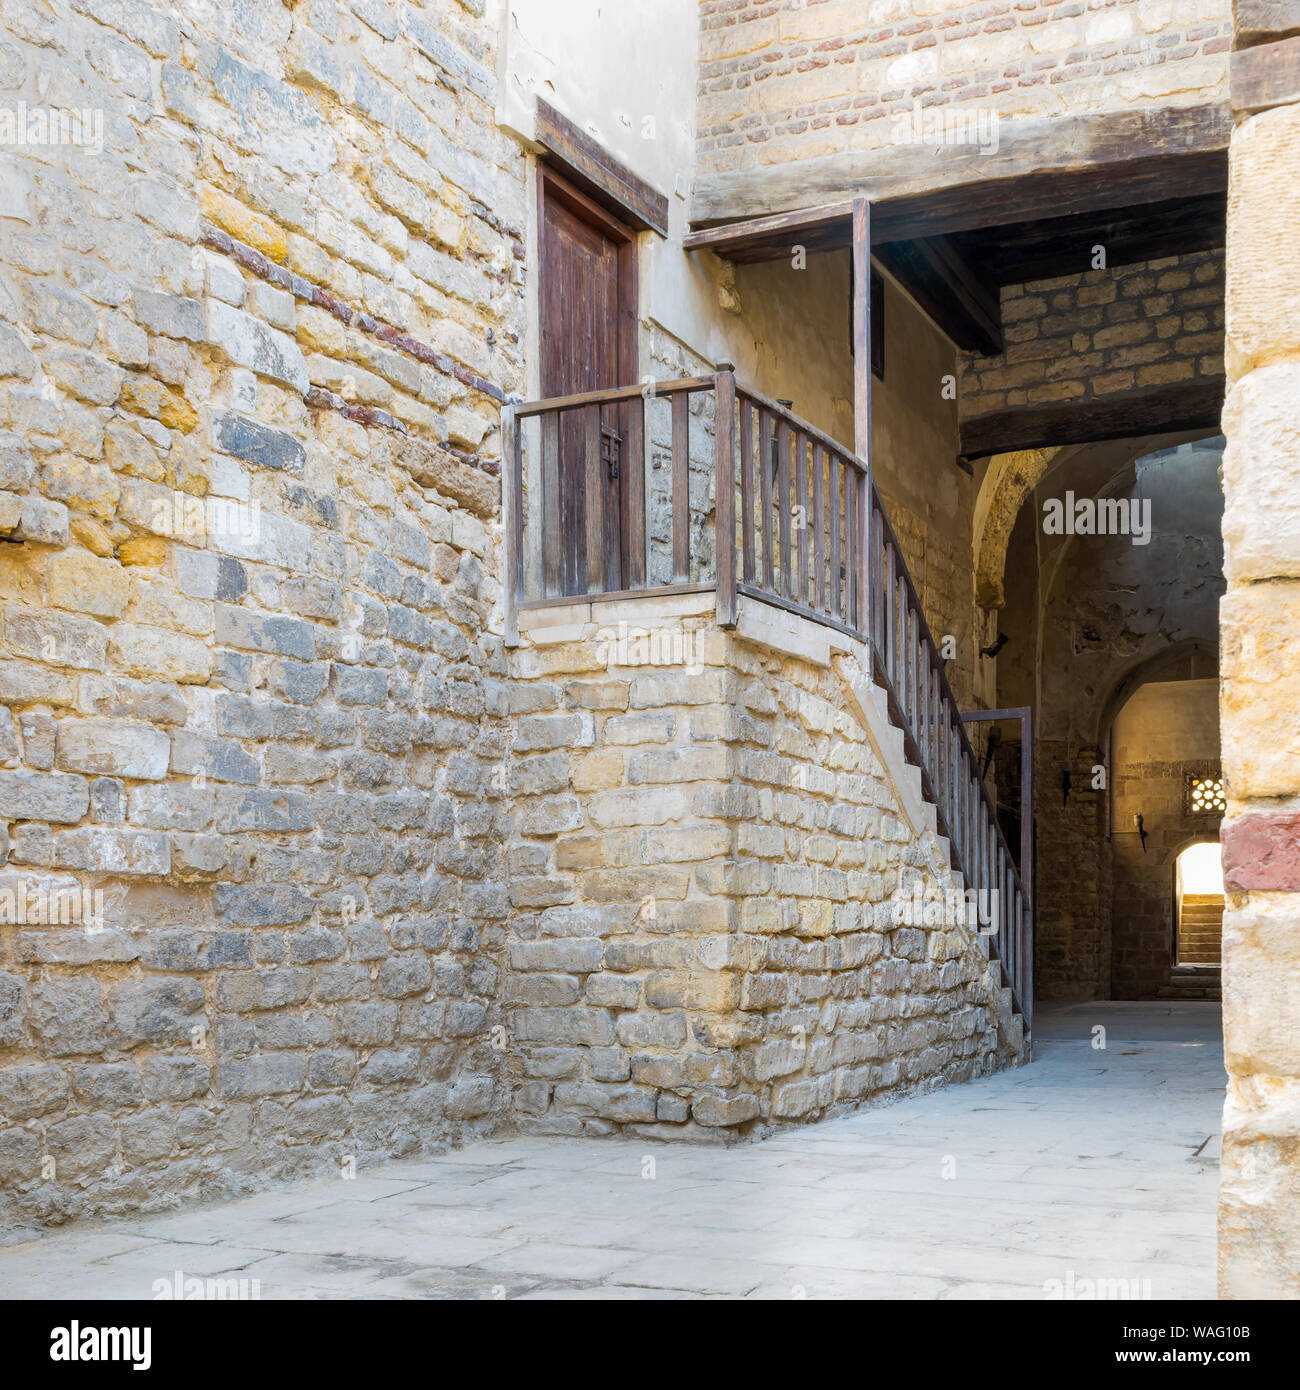 Exterior daylight shot of old abandoned staircase with wooden balustrade and wooden door at stone bricks passage surrounding Sultan Qalawun Complex located in Al Moez Street, Cairo, Egypt Stock Photo